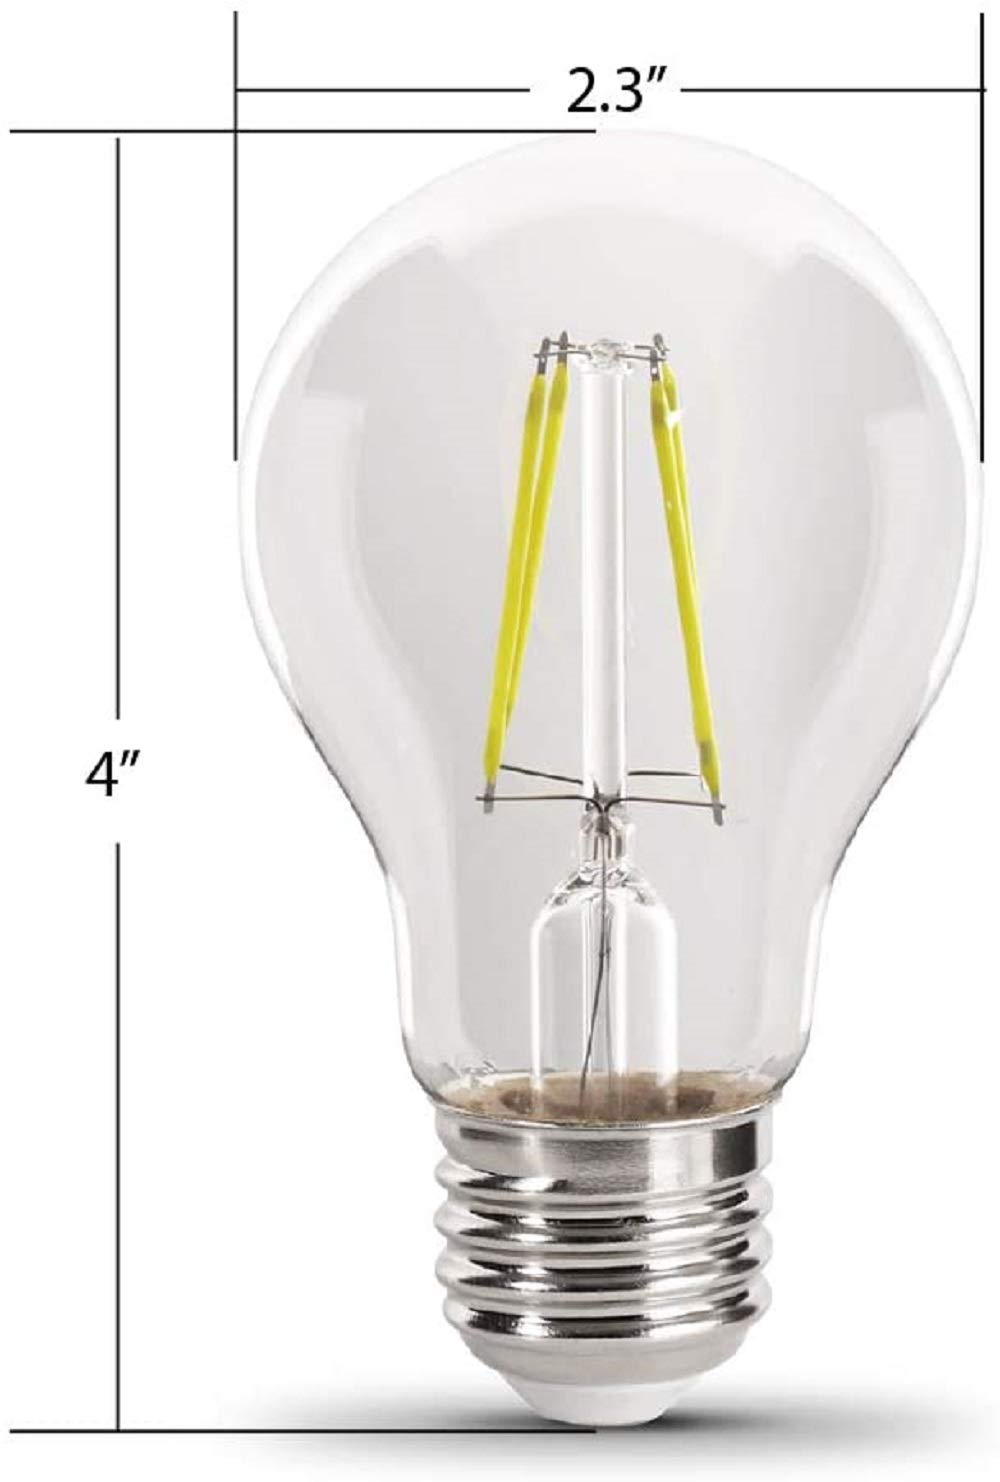 Feit Electric A19/TR/LED 4.5-Watt Dimmable Red Filament Glass, A19 Clear LED Light Bulb